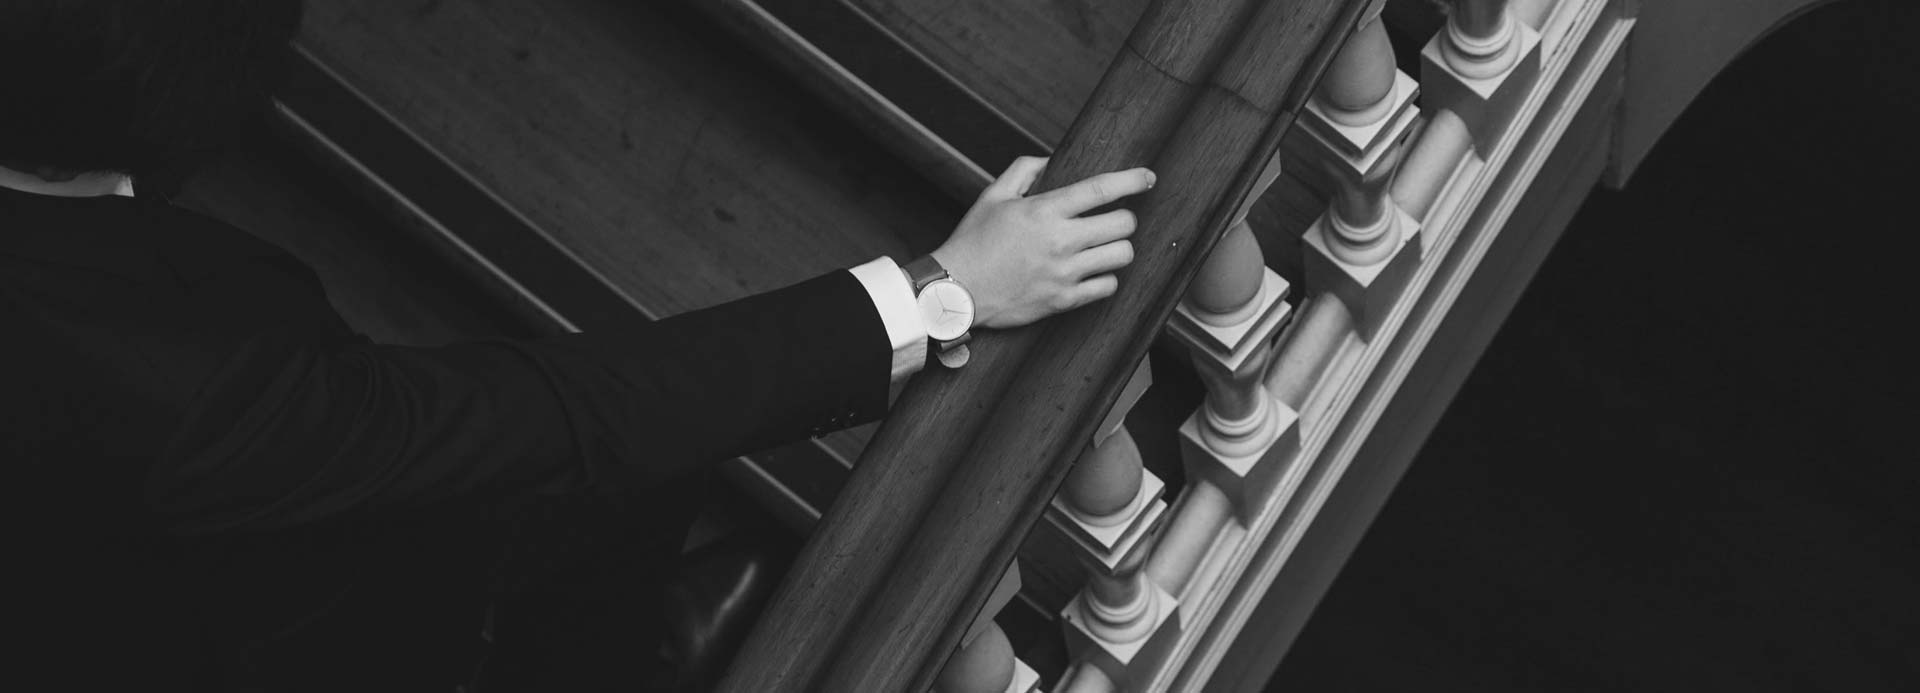 overhead view of man in suit with watch walking up staircase with hand on railing